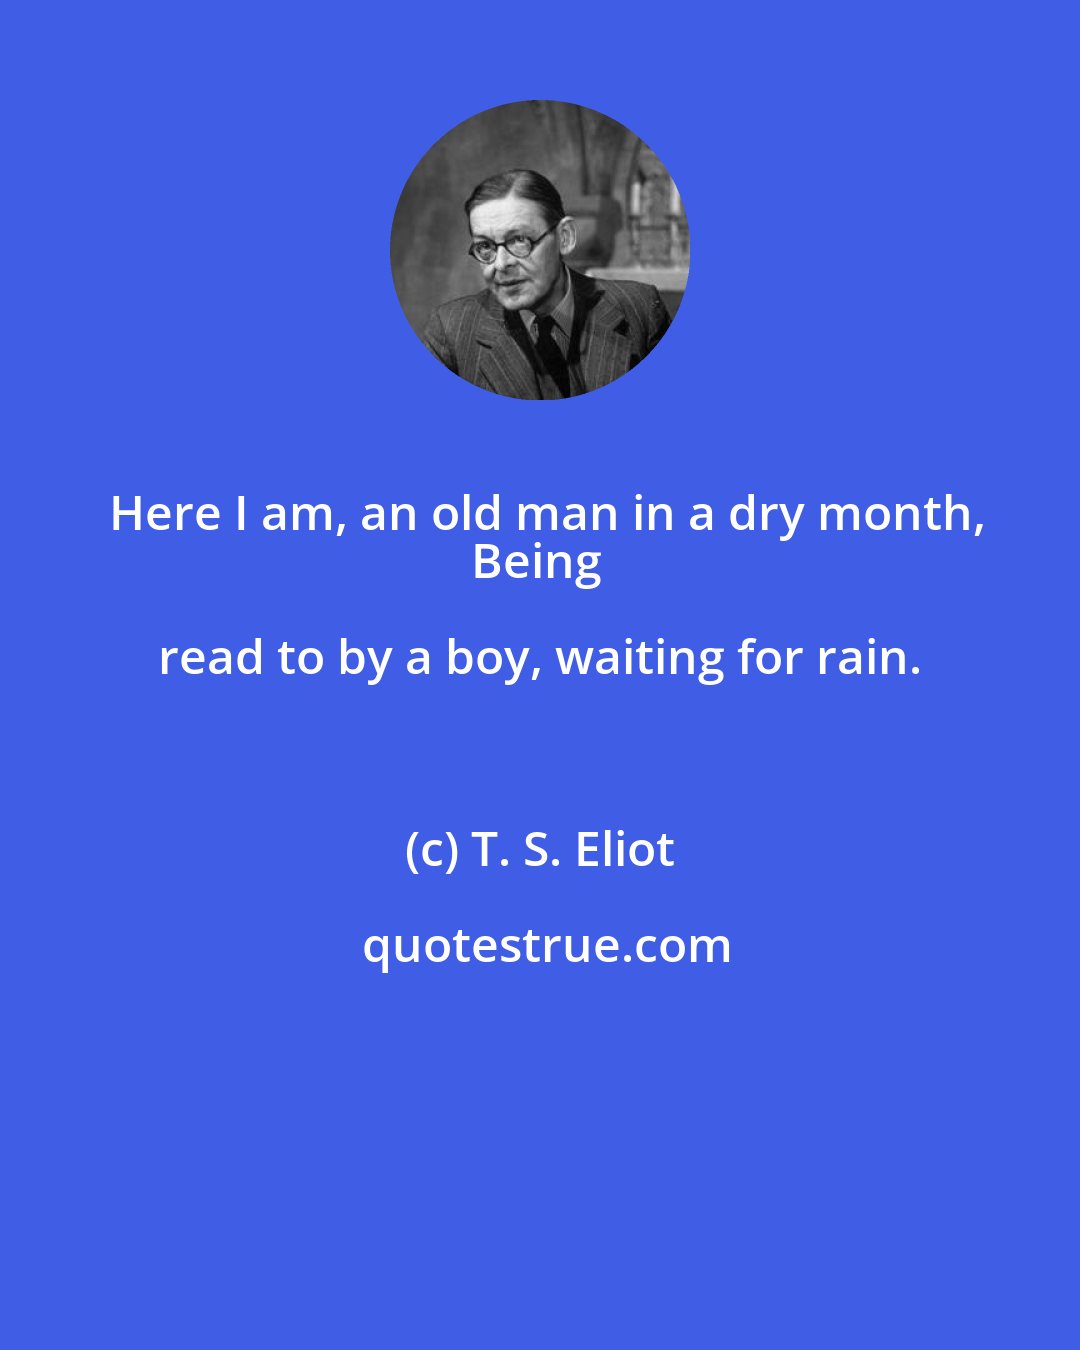 T. S. Eliot: Here I am, an old man in a dry month,
Being read to by a boy, waiting for rain.